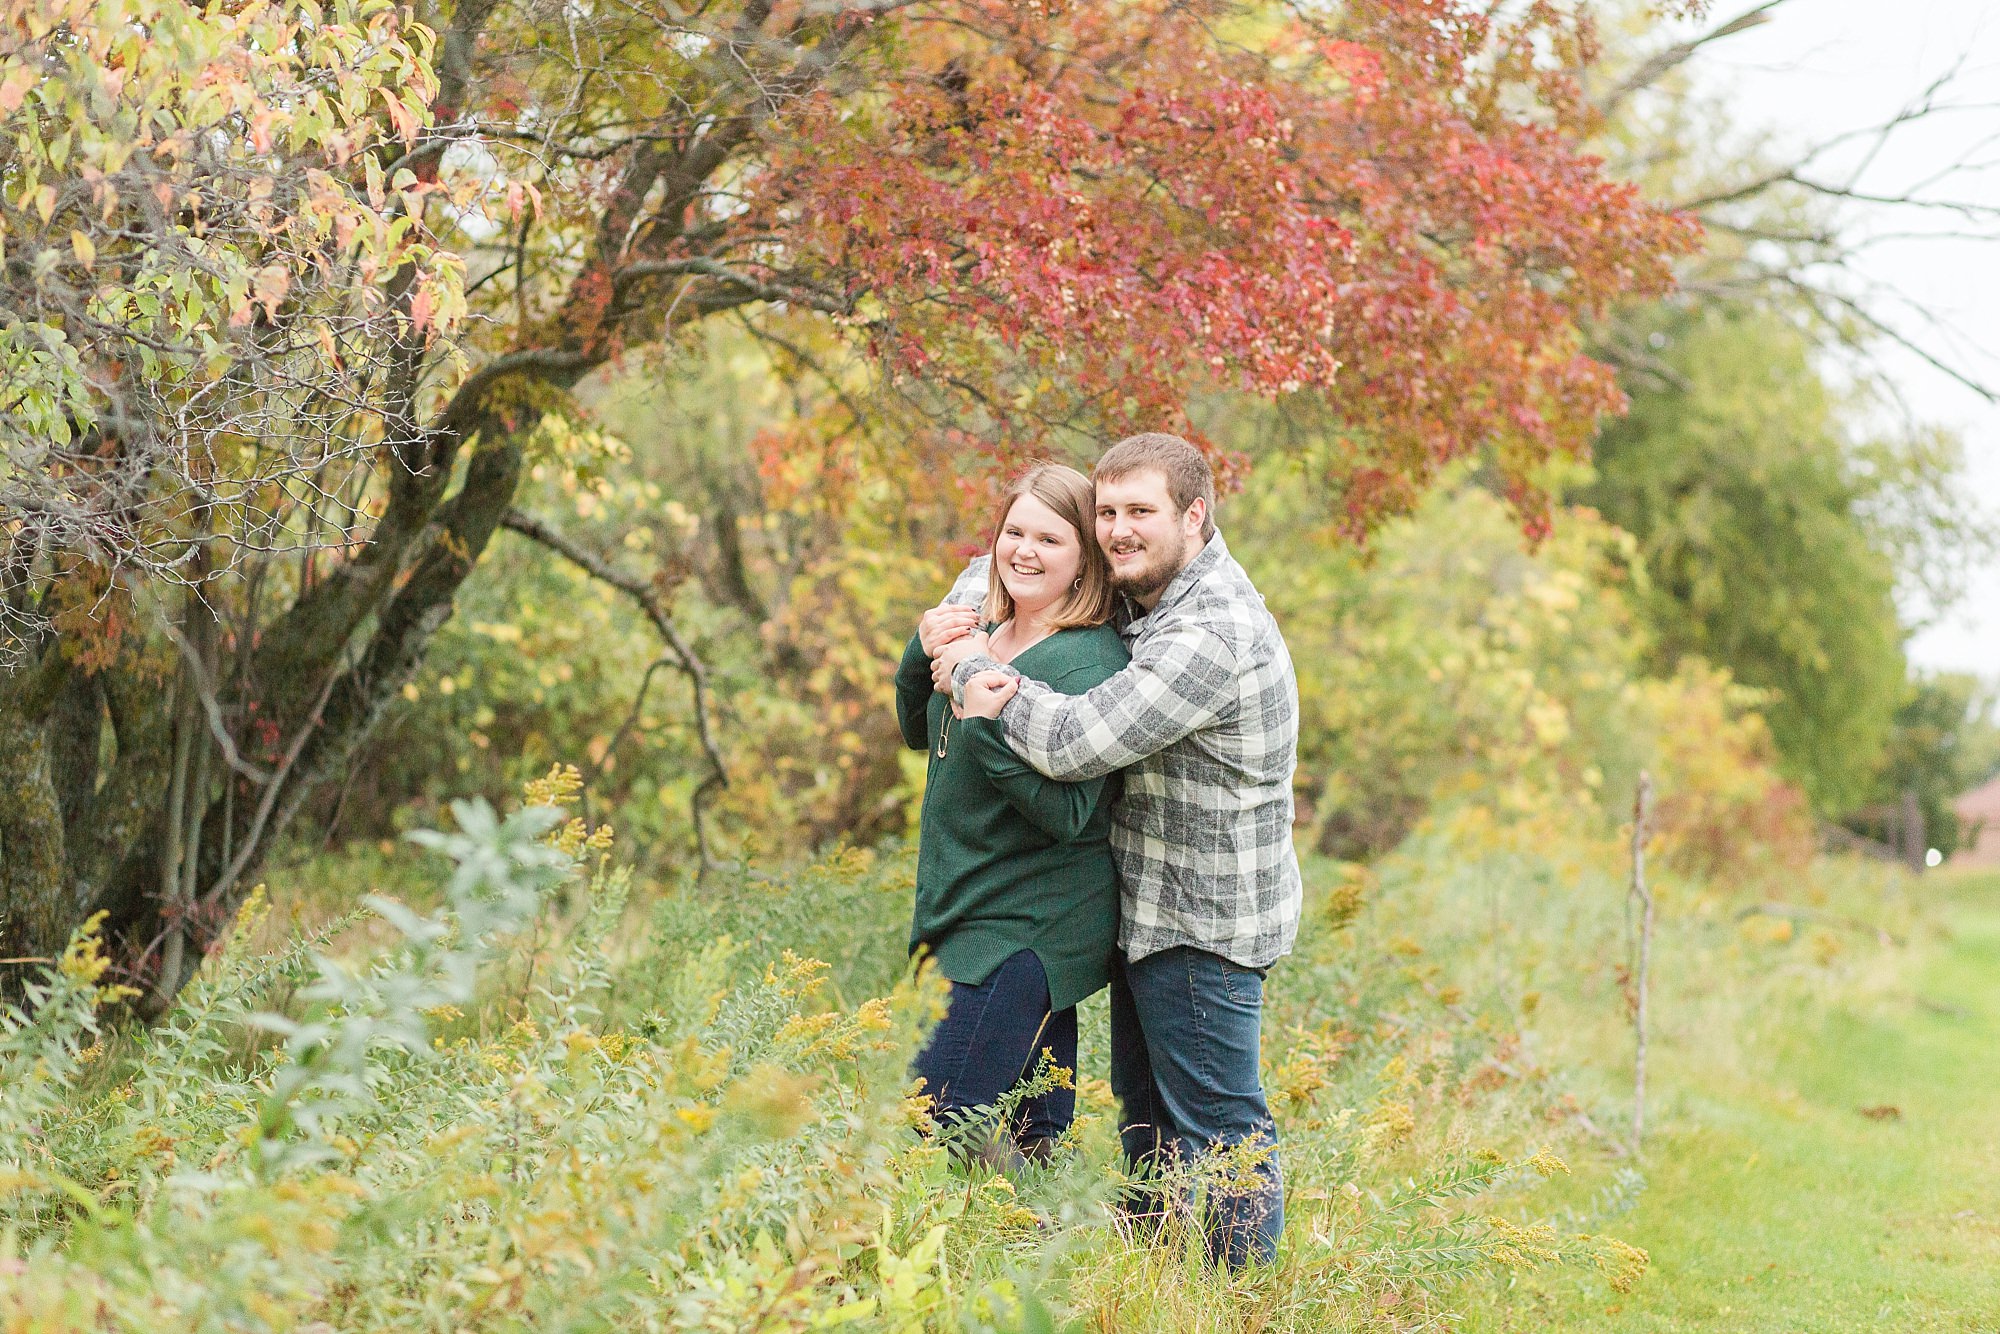 In green and grey plaid, an engaged couple smile in front of a red fall tree